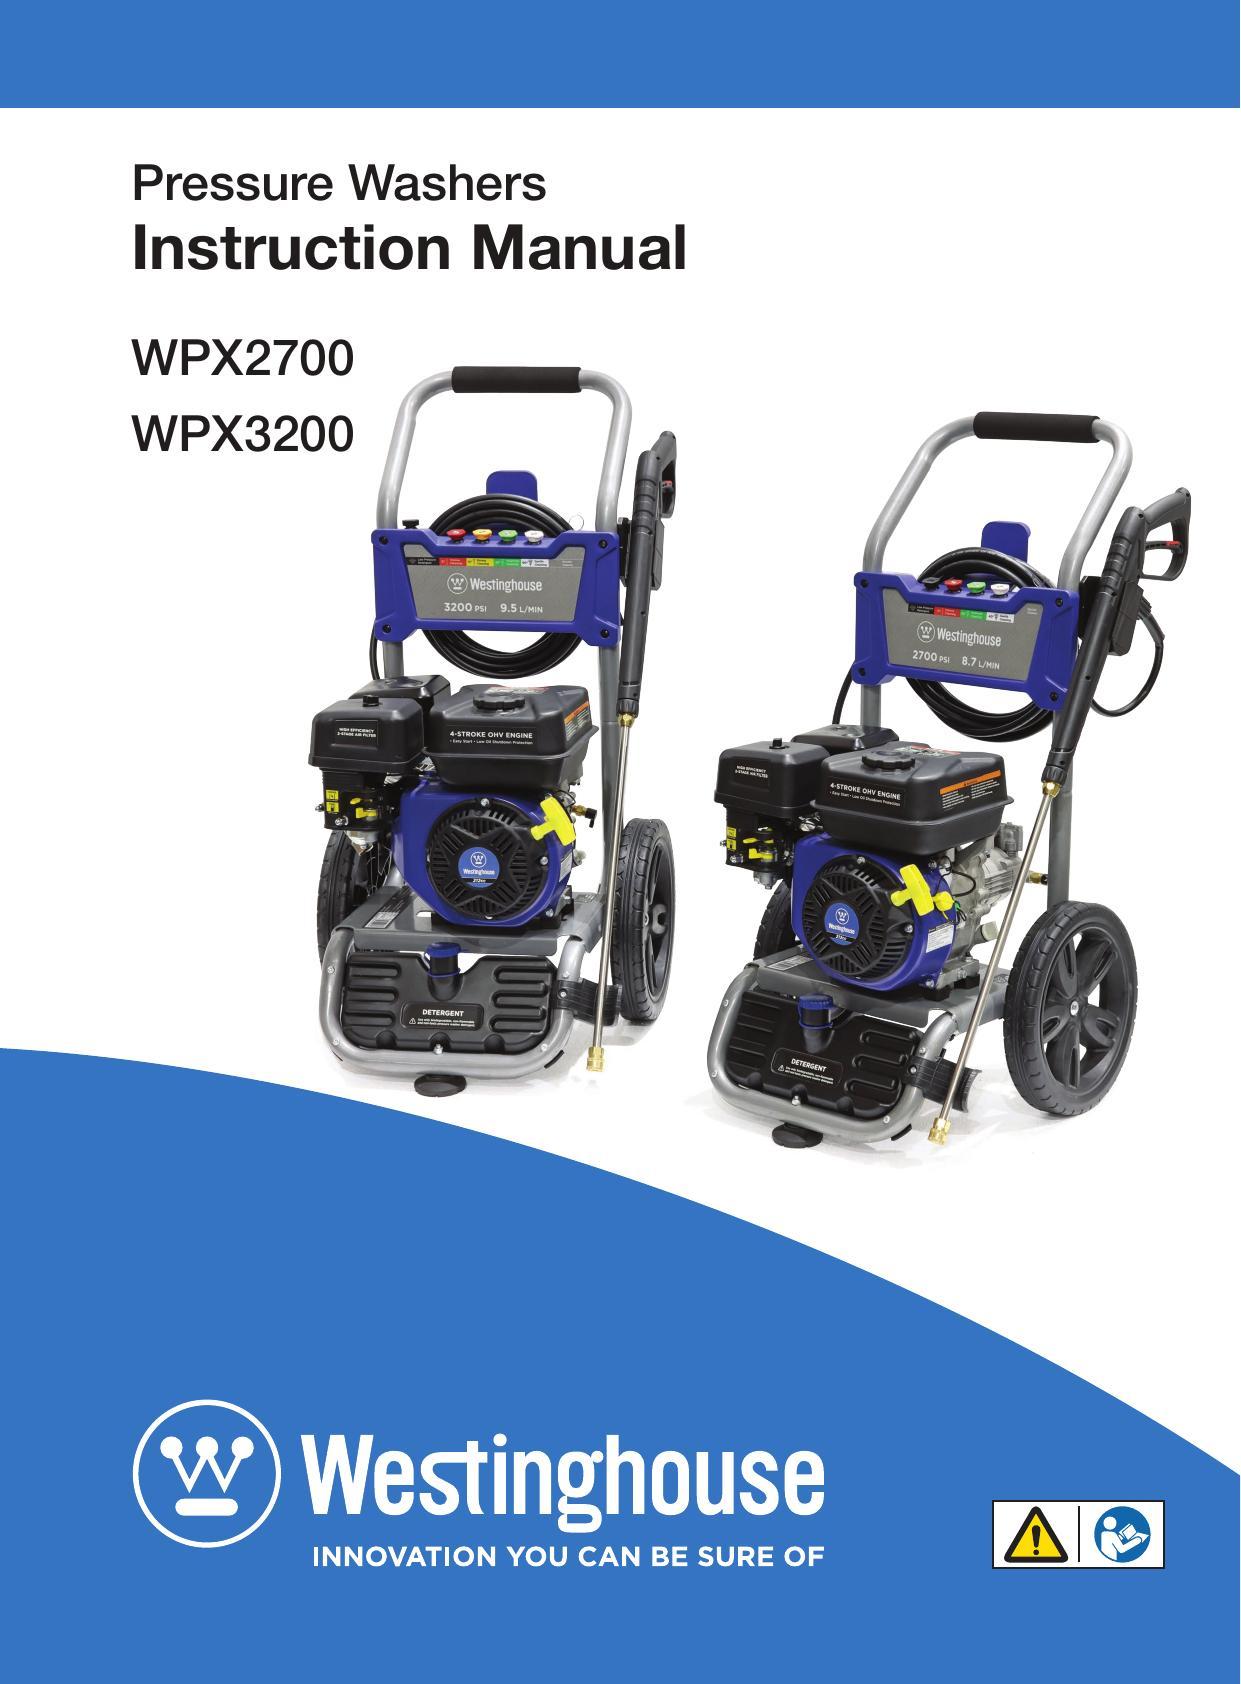 pressure-washers-instruction-manual-for-westinghouse-wpx27o0-wpx3200.pdf